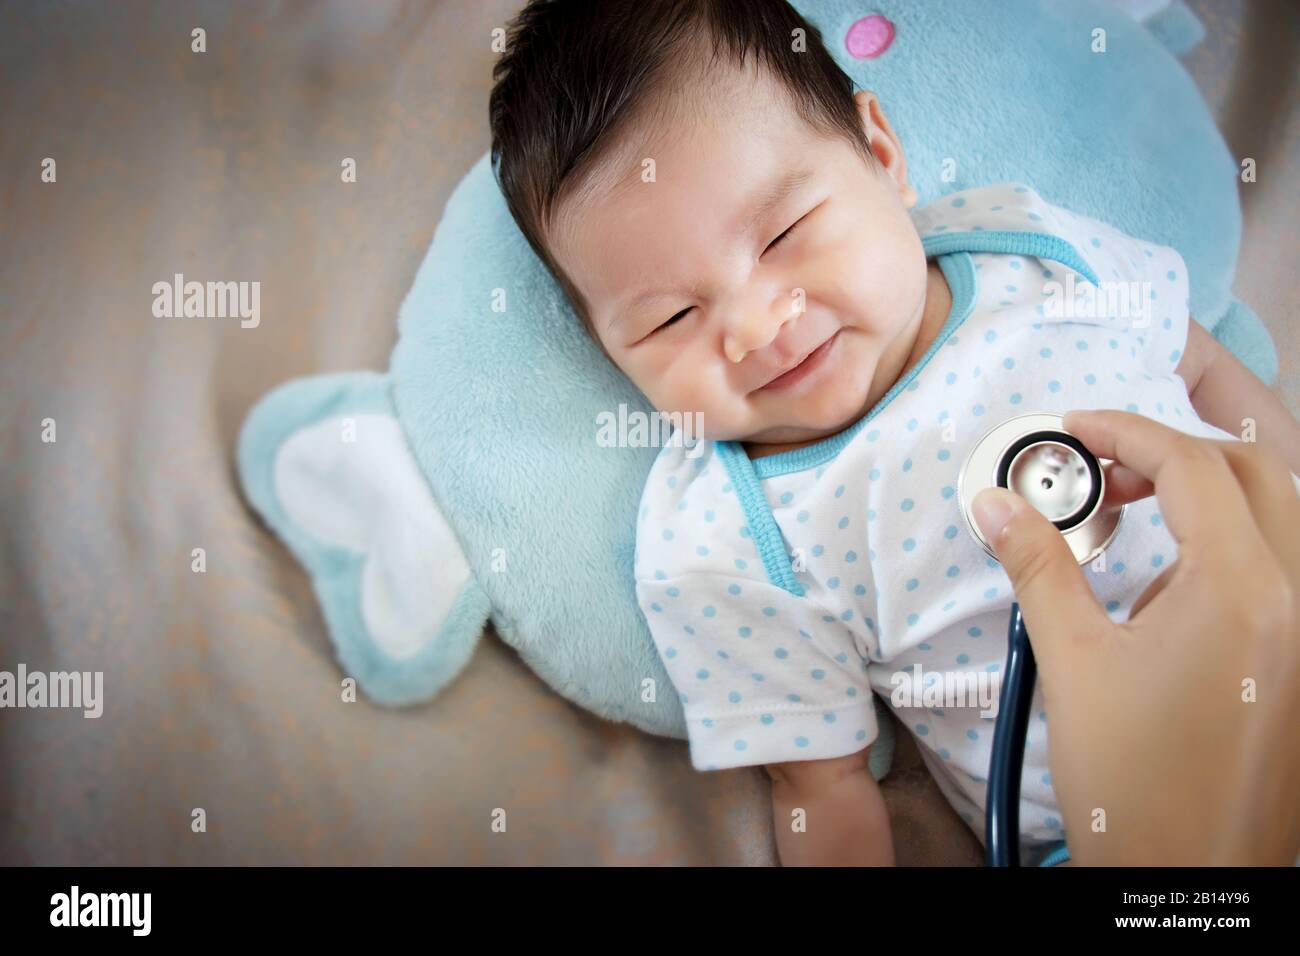 healthy people concept. Asian adorable baby infant laughing with happy face for good health on doctor check up time Stock Photo